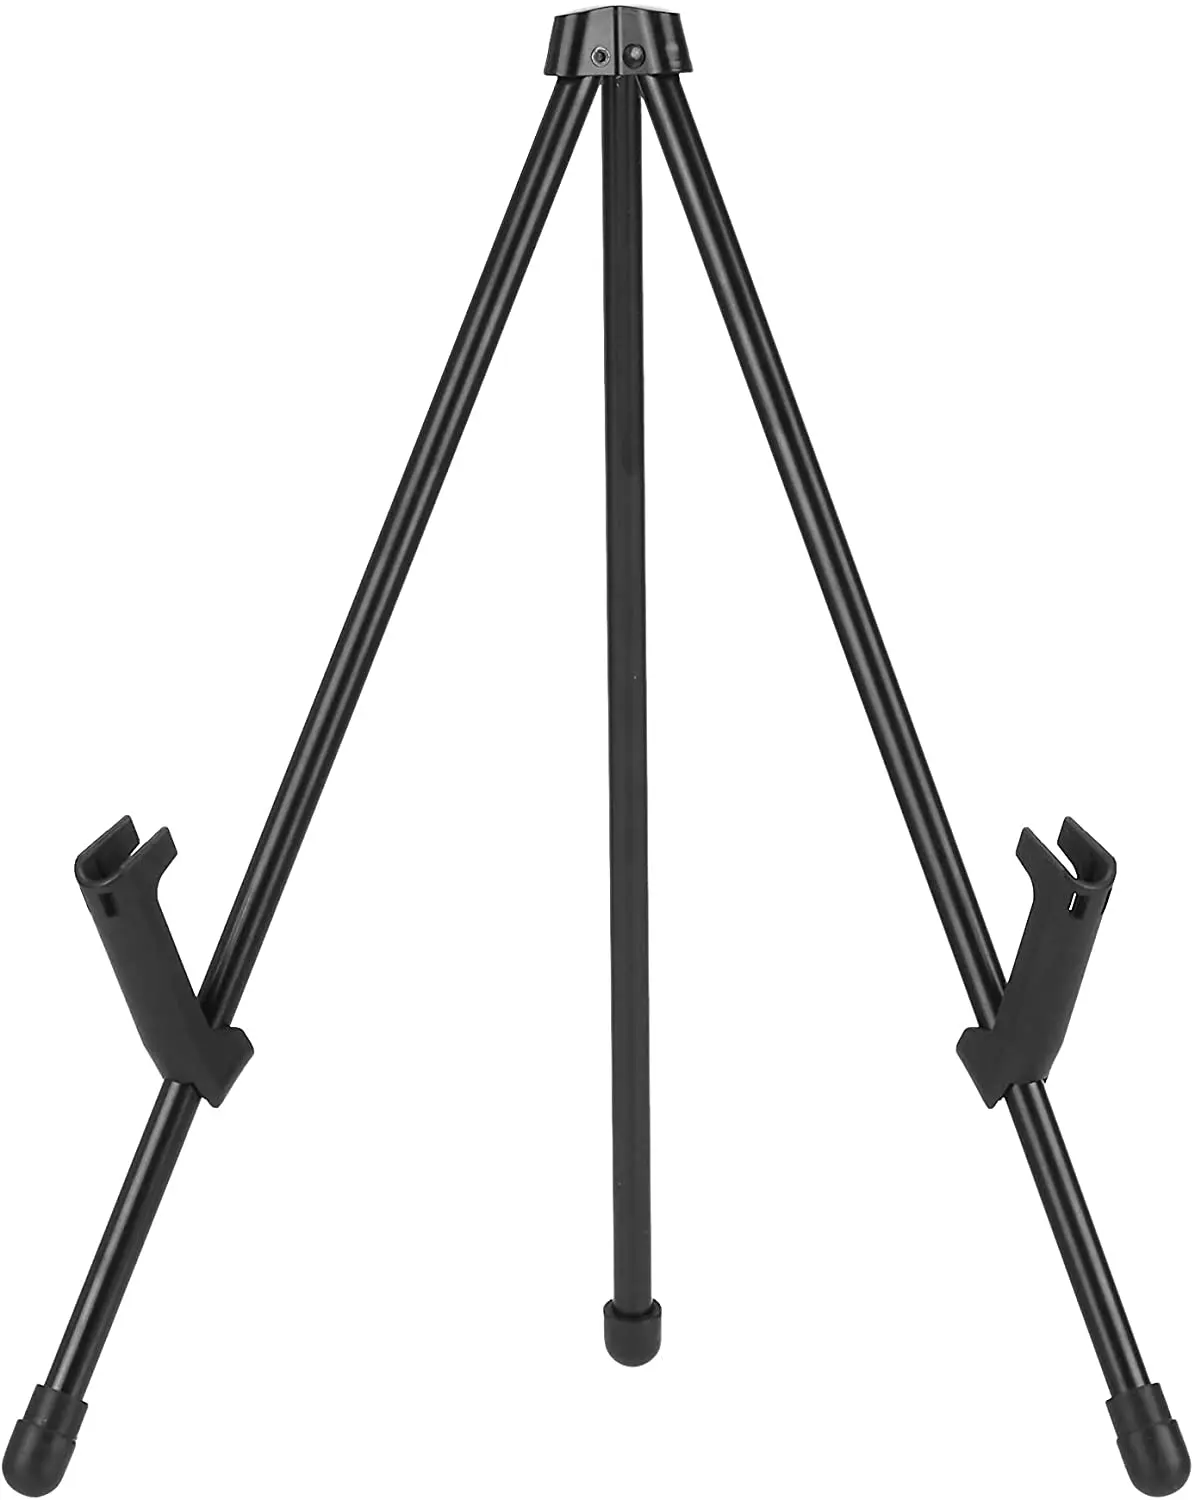 Tabletop Instant Easel – חֲצוּבָה, Supports 5 lbs